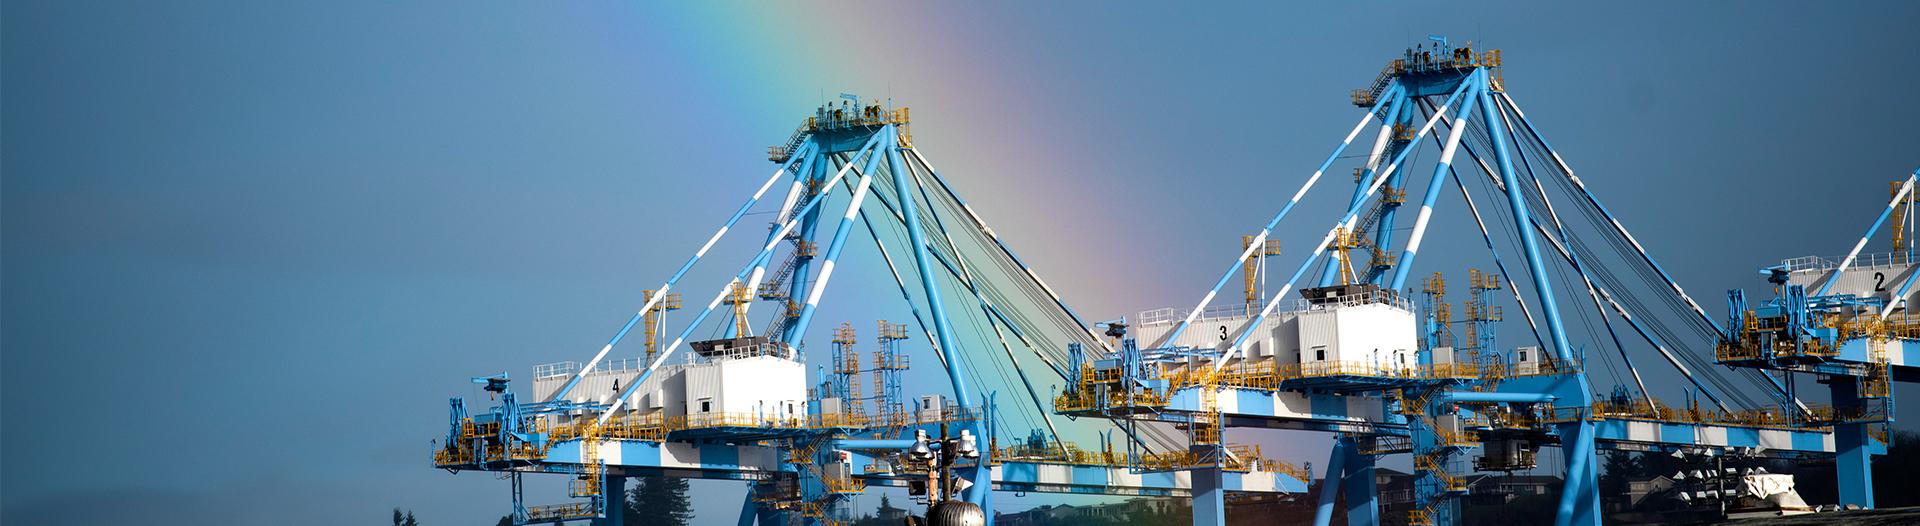 photo of a rainbow over container cranes